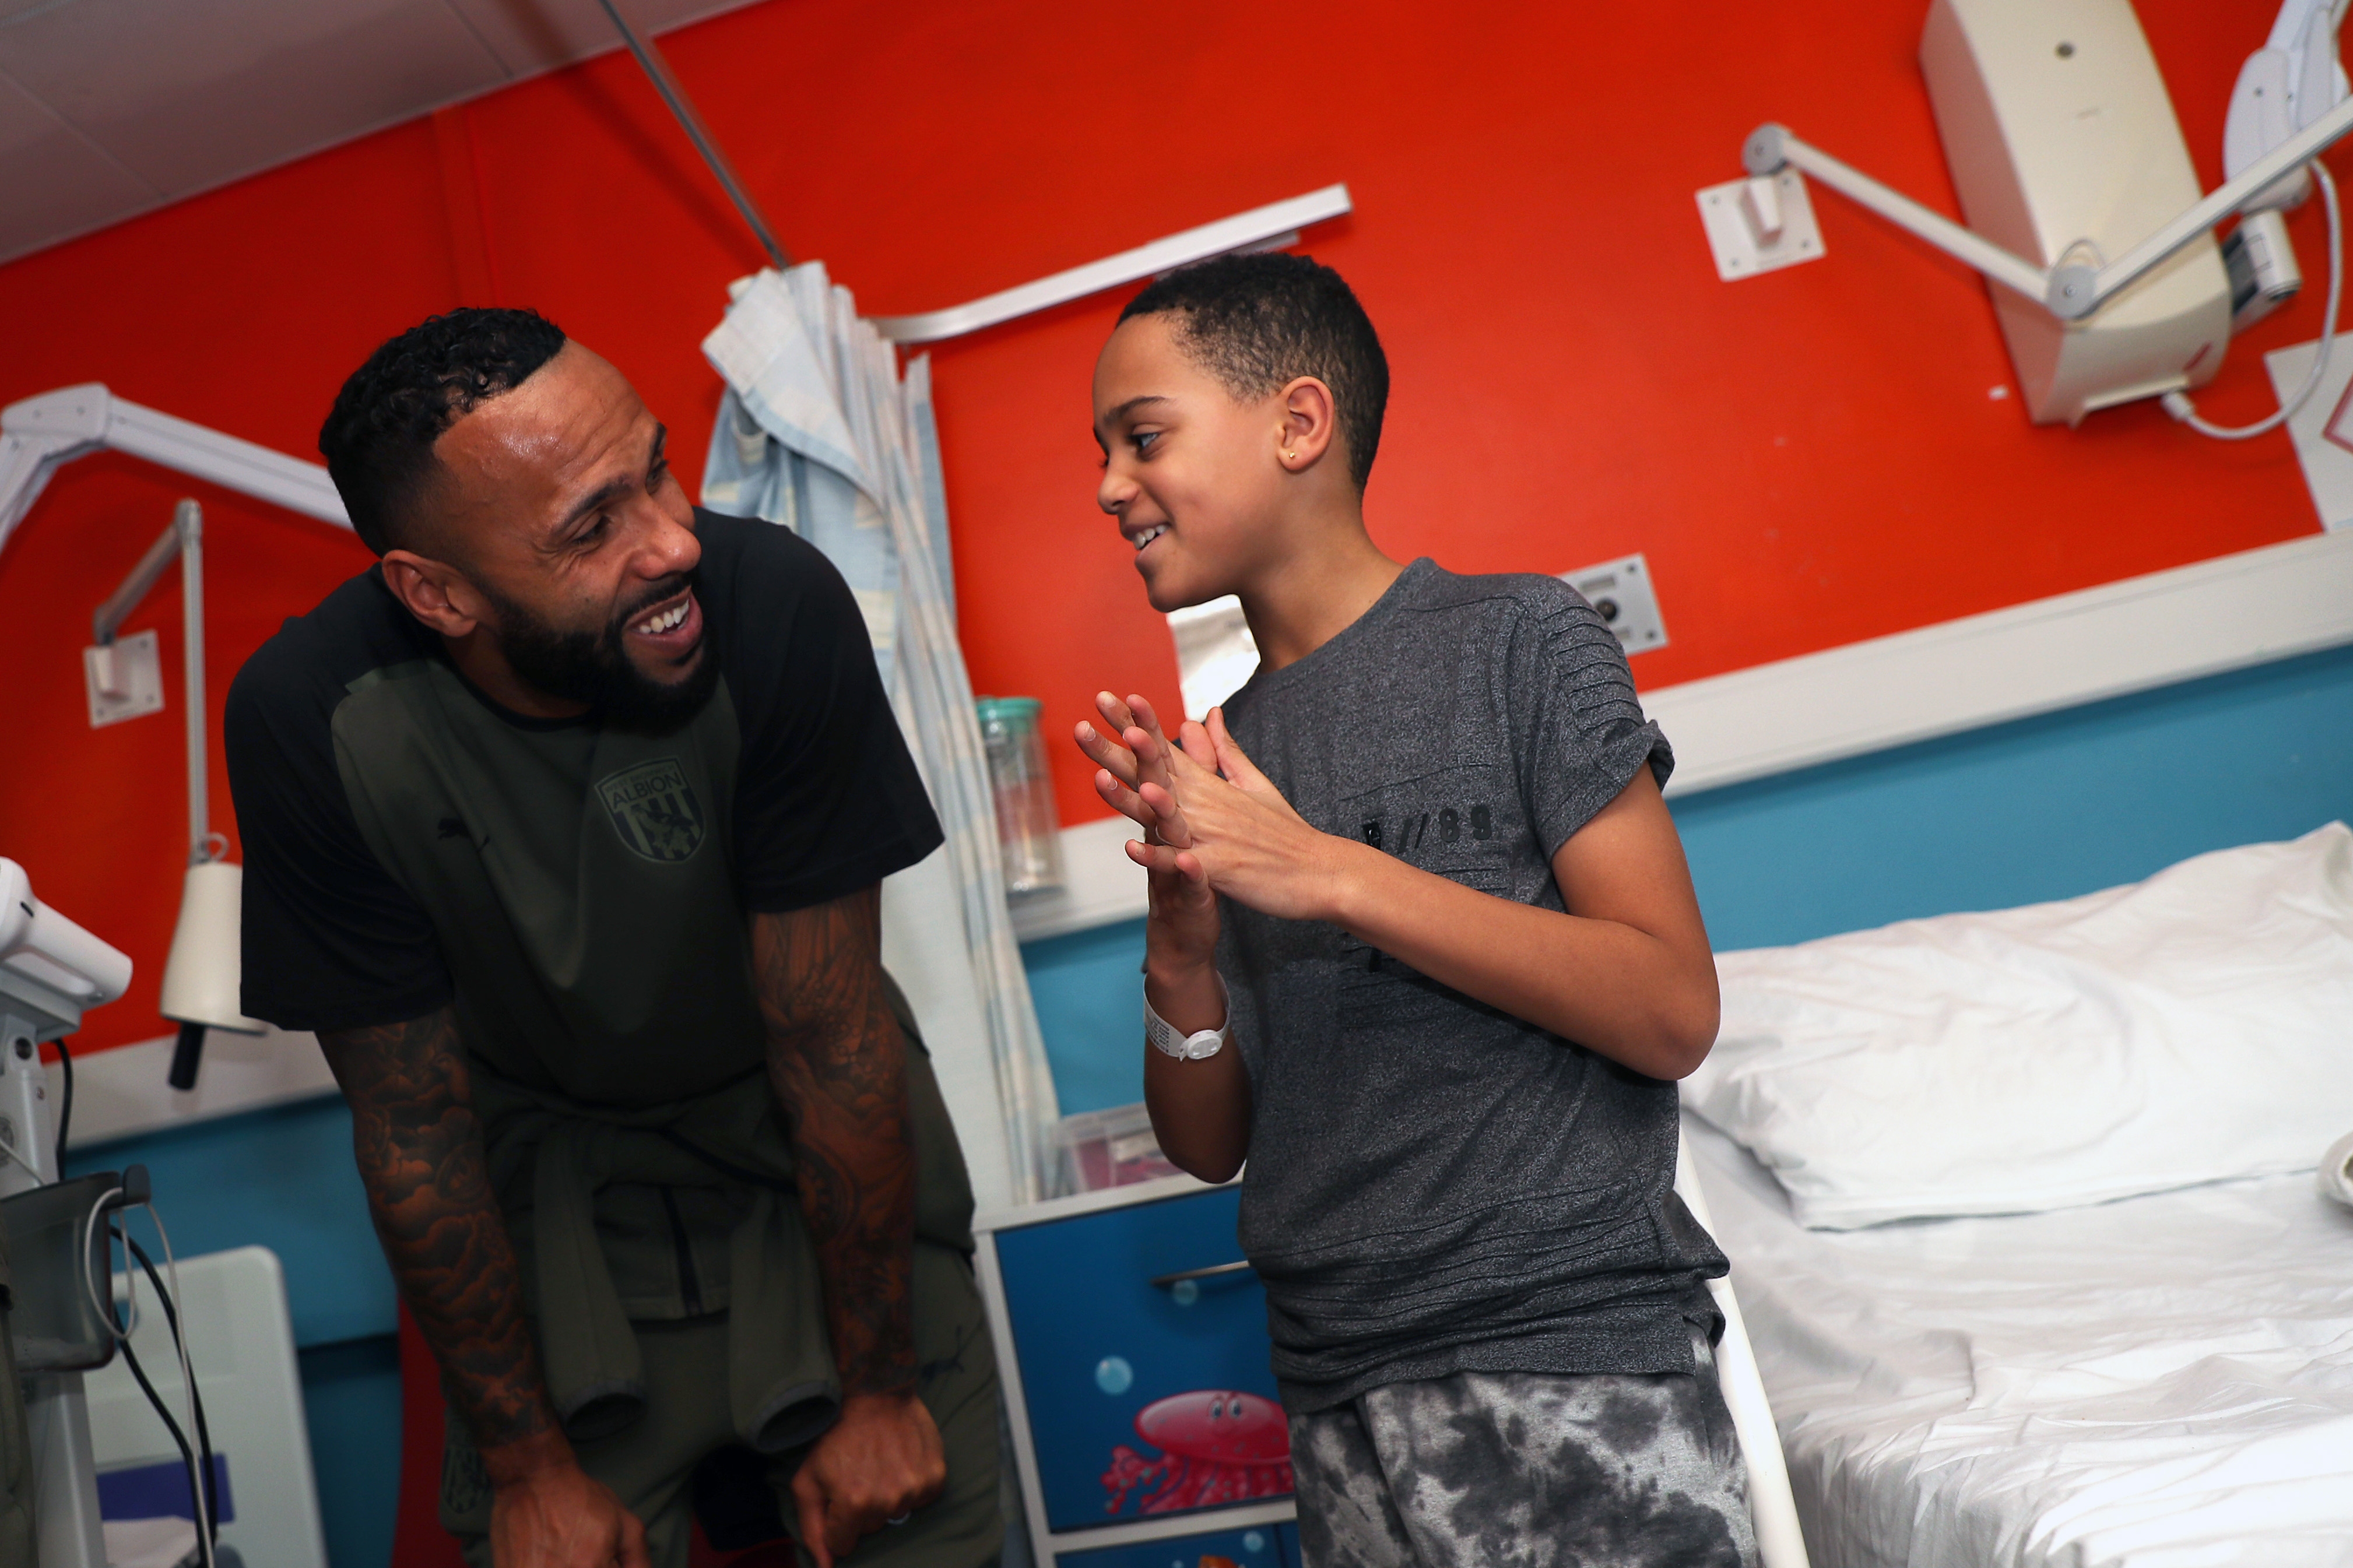 Kyle Bartley meets a young patient at Sandwell General Hospital